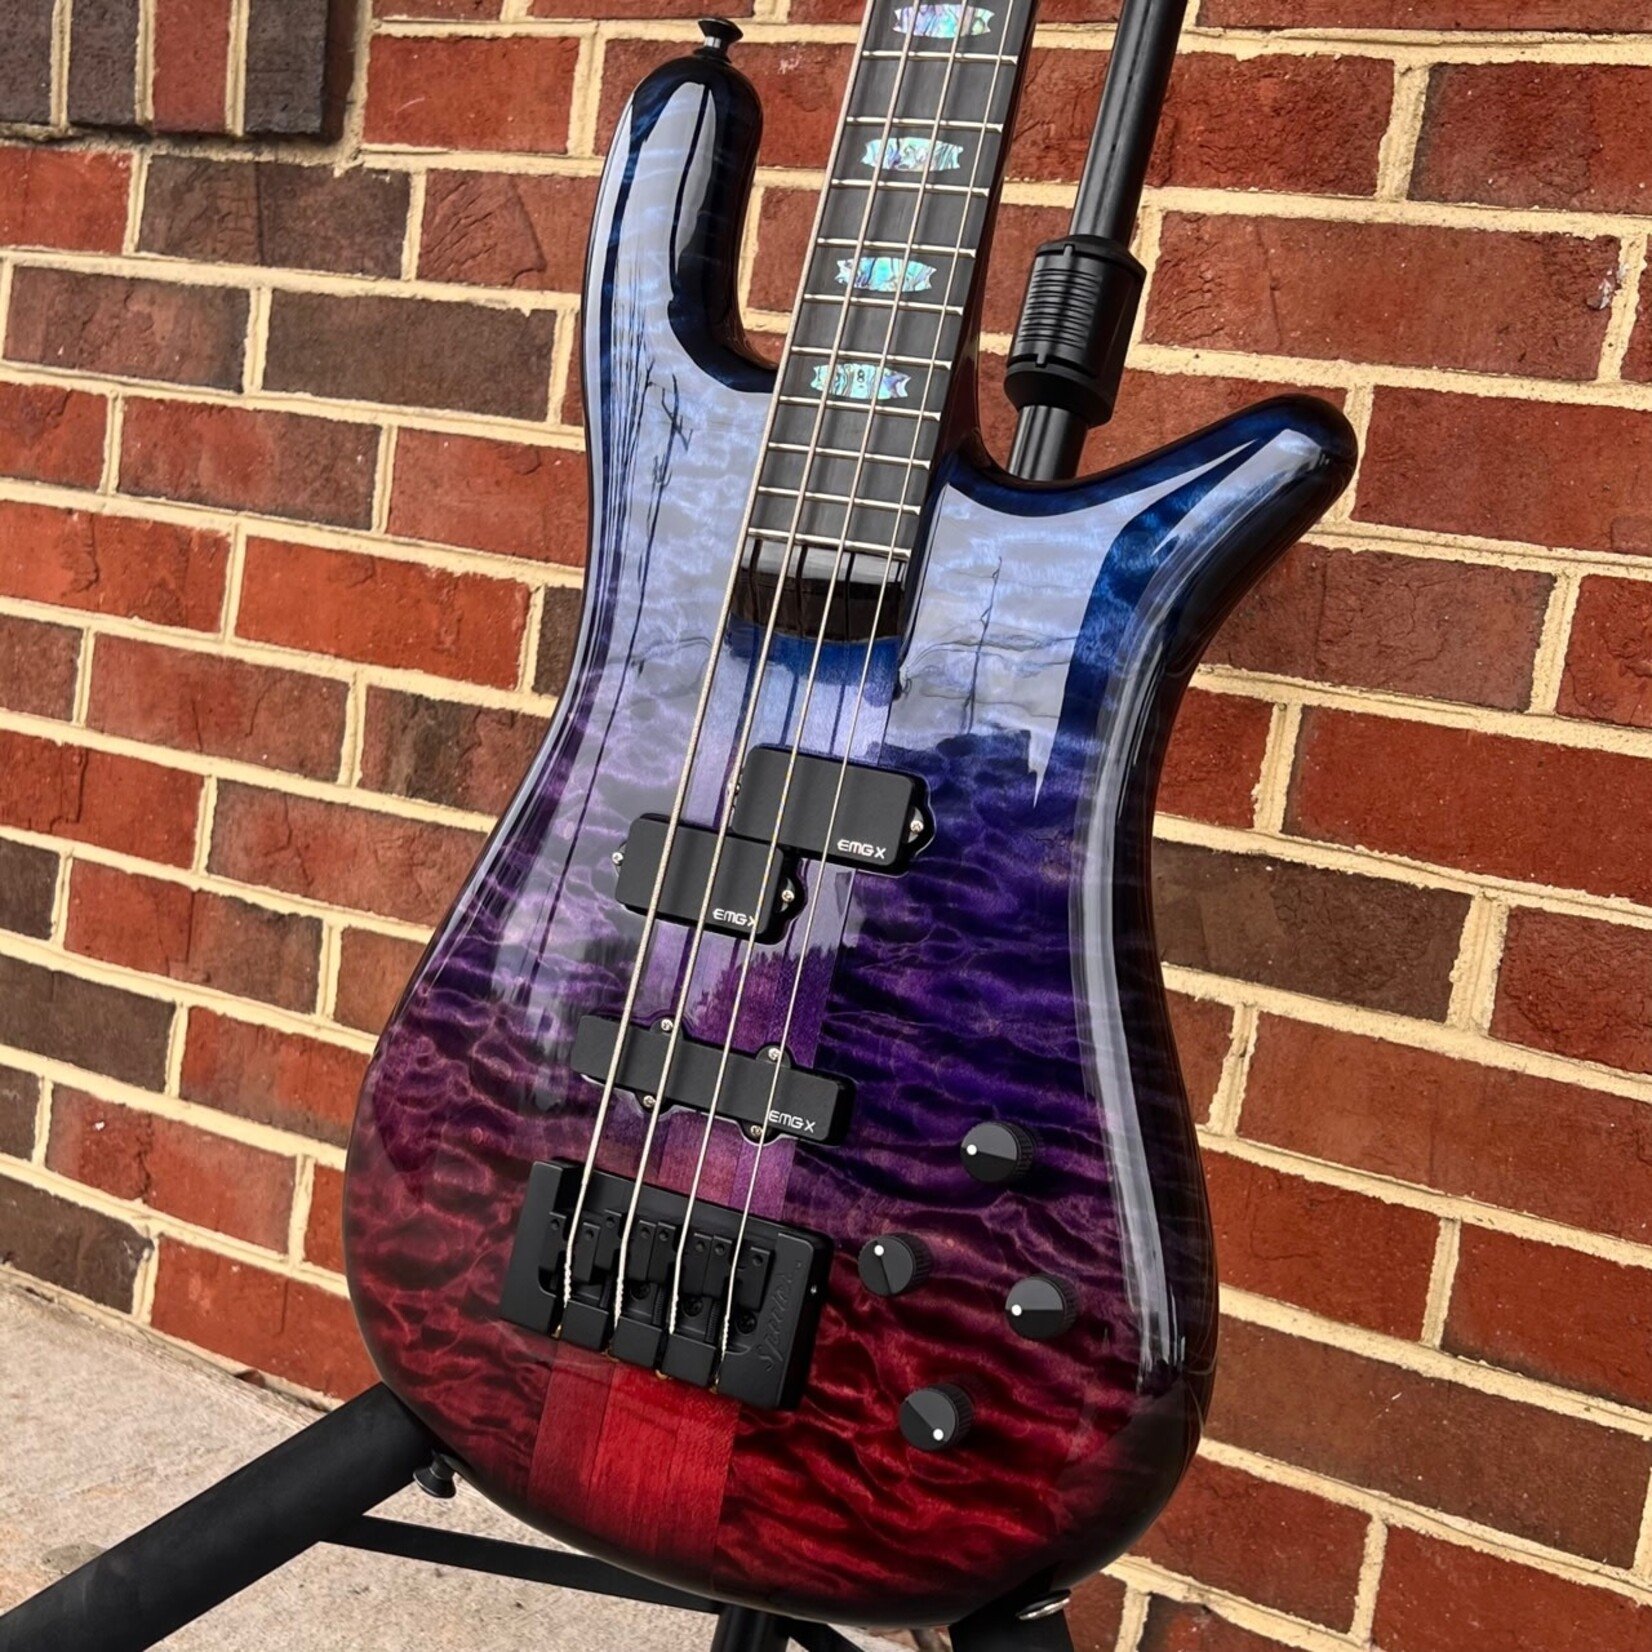 Spector Spector USA NS-2, Interstellar, Quilted Maple Top, Reclaimed Redwood Body, Ebony Fretboard, Abalone Crown Inlays, EMG PX/SJX Pickups, HAZ 9v Preamp, Hardshell Case (USED)